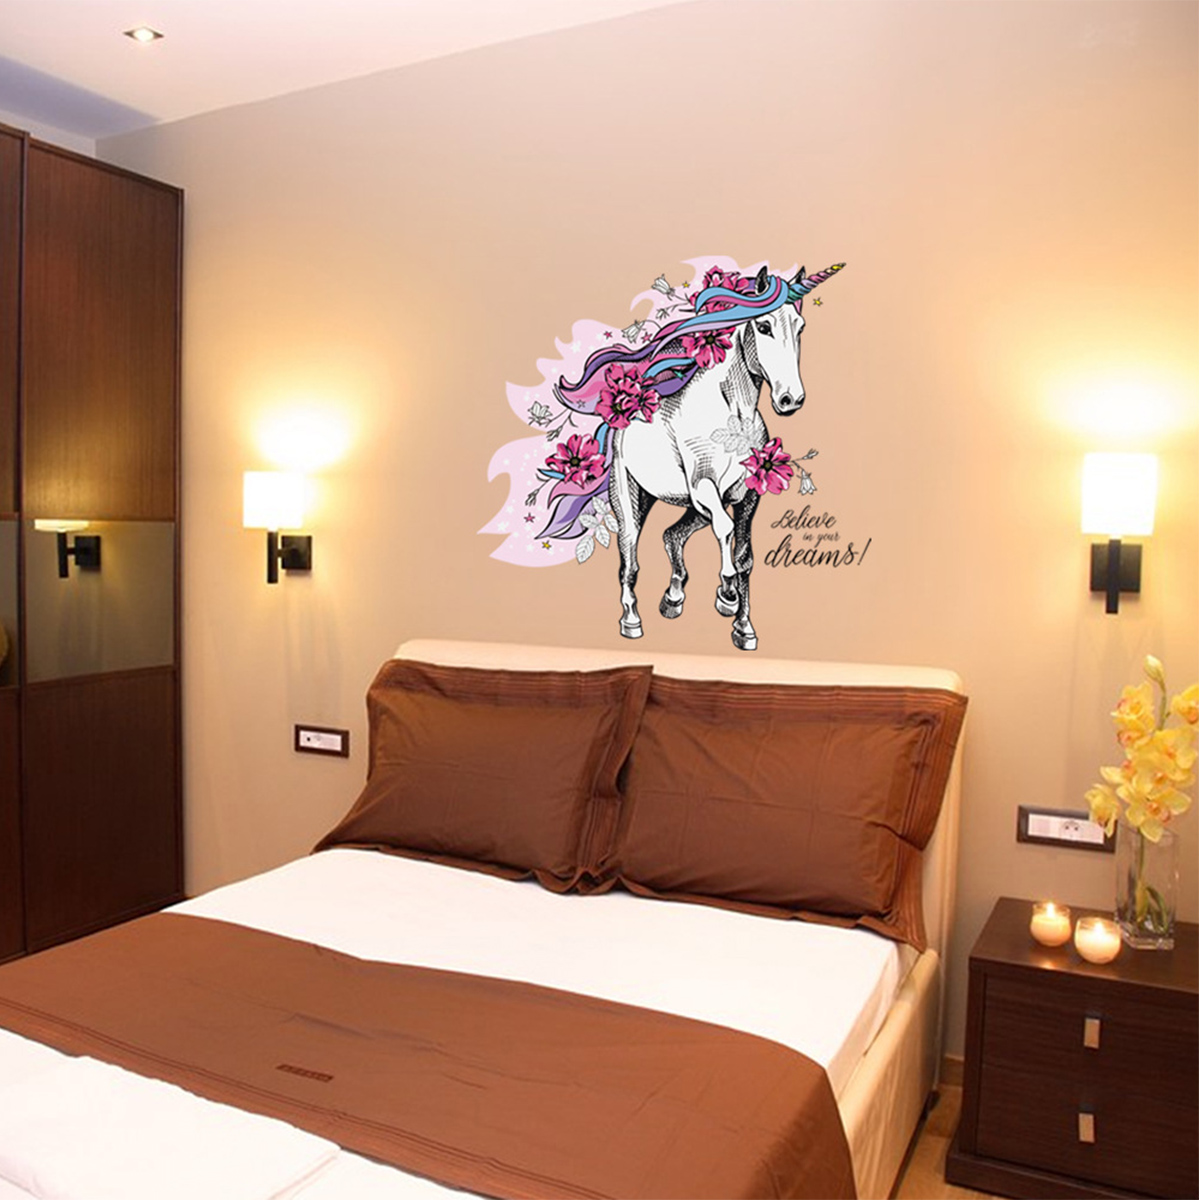 Magical-Running-Horse-Removable-PVC-Wall-Sticker-Background-Kids-Bedroom-Decals-1813107-3